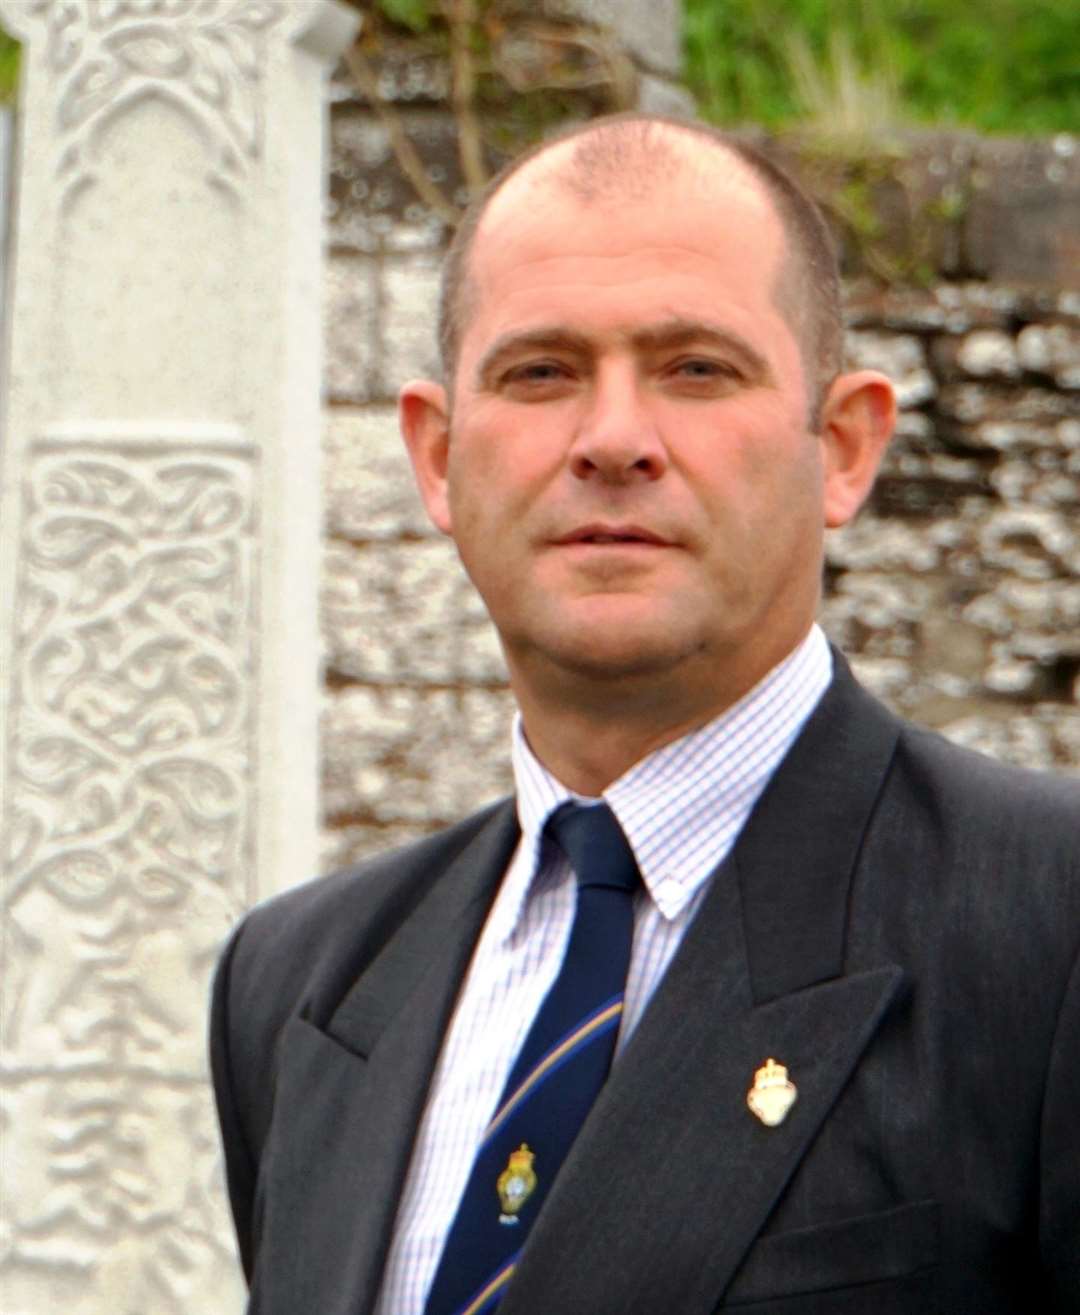 Captain Richard Otley resigned as organiser of the Mey Games in March. Picture: DGS